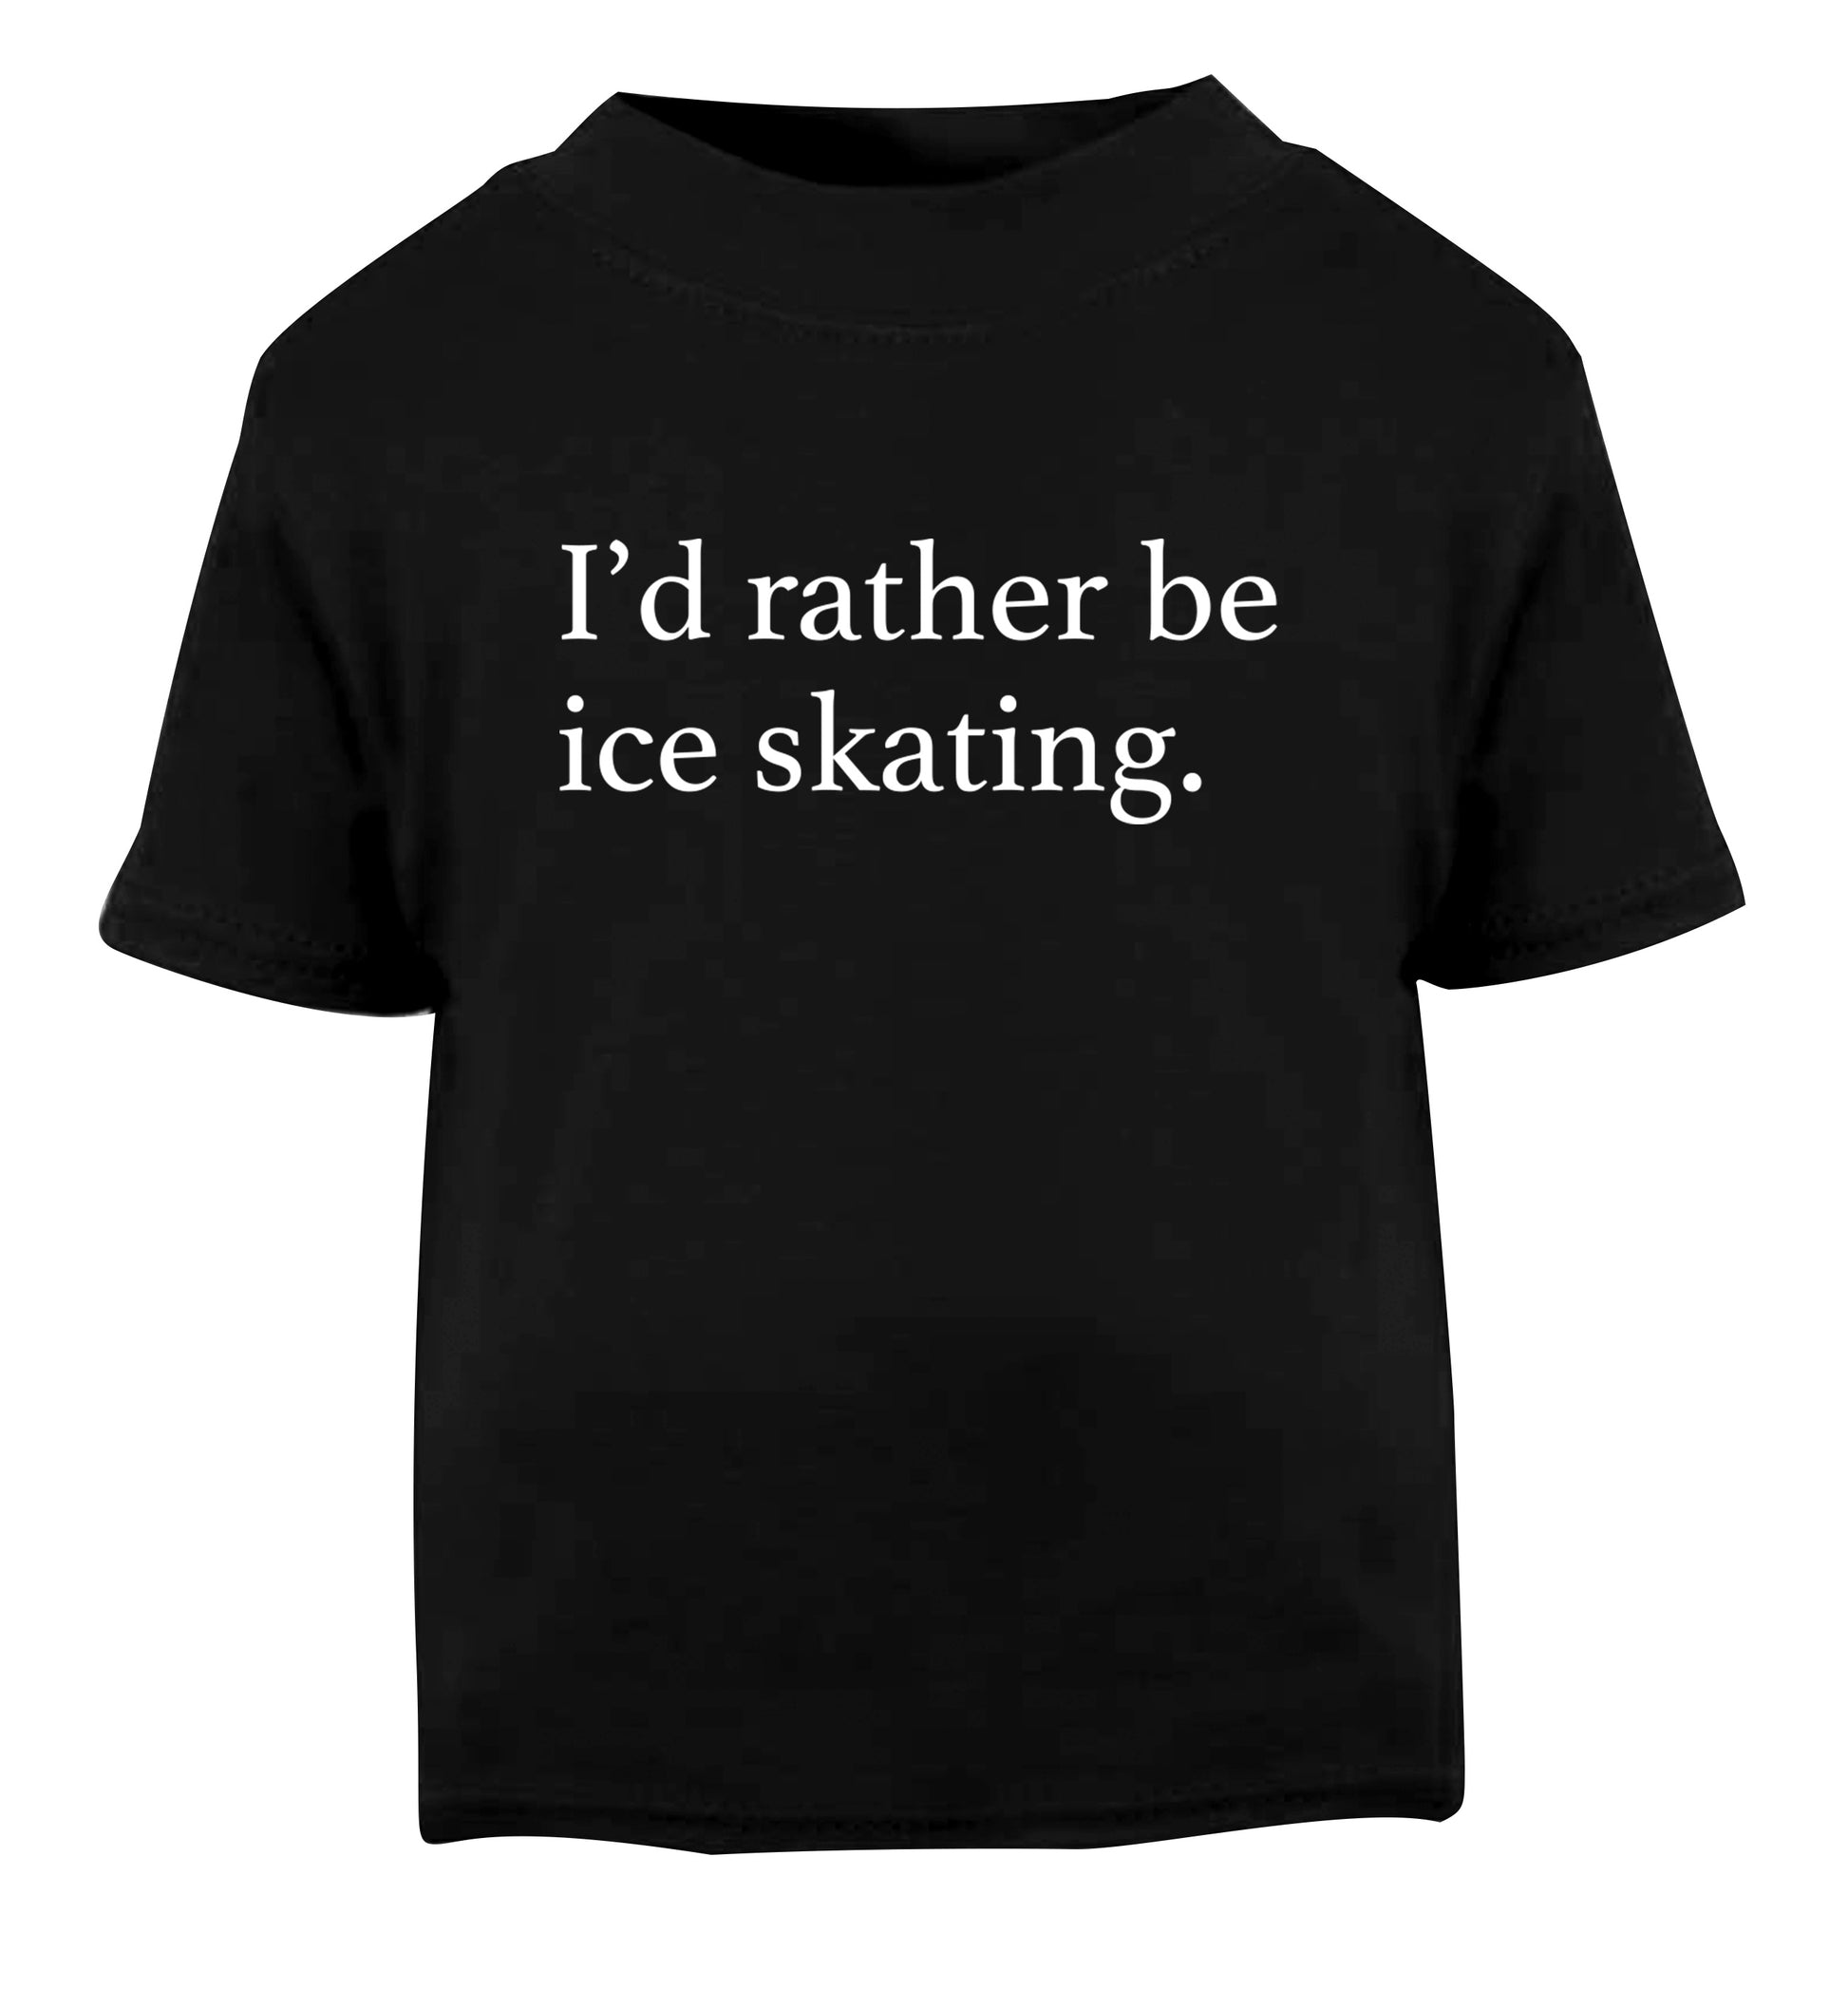 I'd rather be ice skating Black Baby Toddler Tshirt 2 years